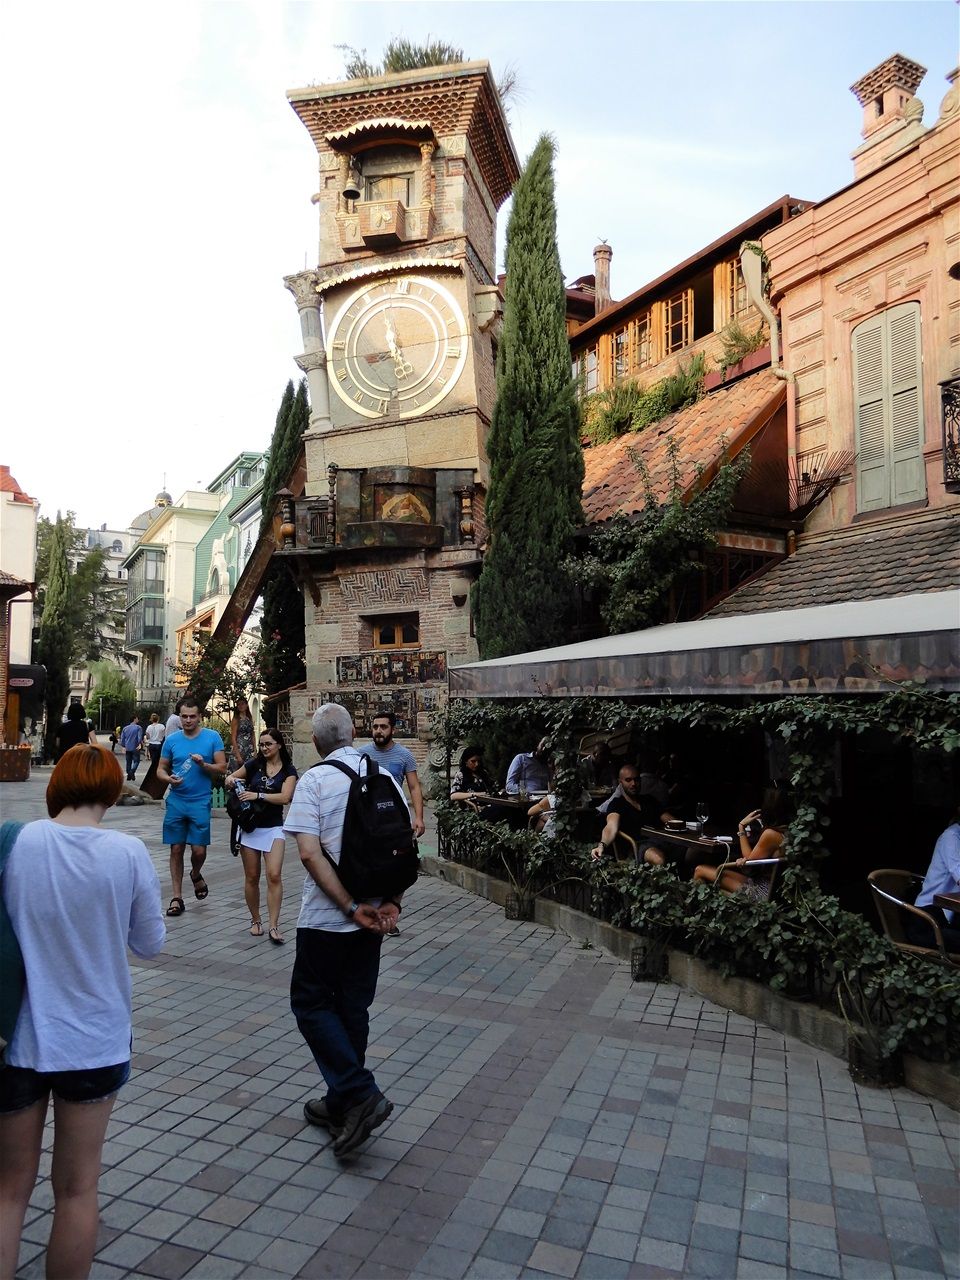 In 2010 Rezo Gabriadze built a unique clock tower next to his marionette theatre in old town. Every hour an angel comes out with a small hammer to ring the bell.